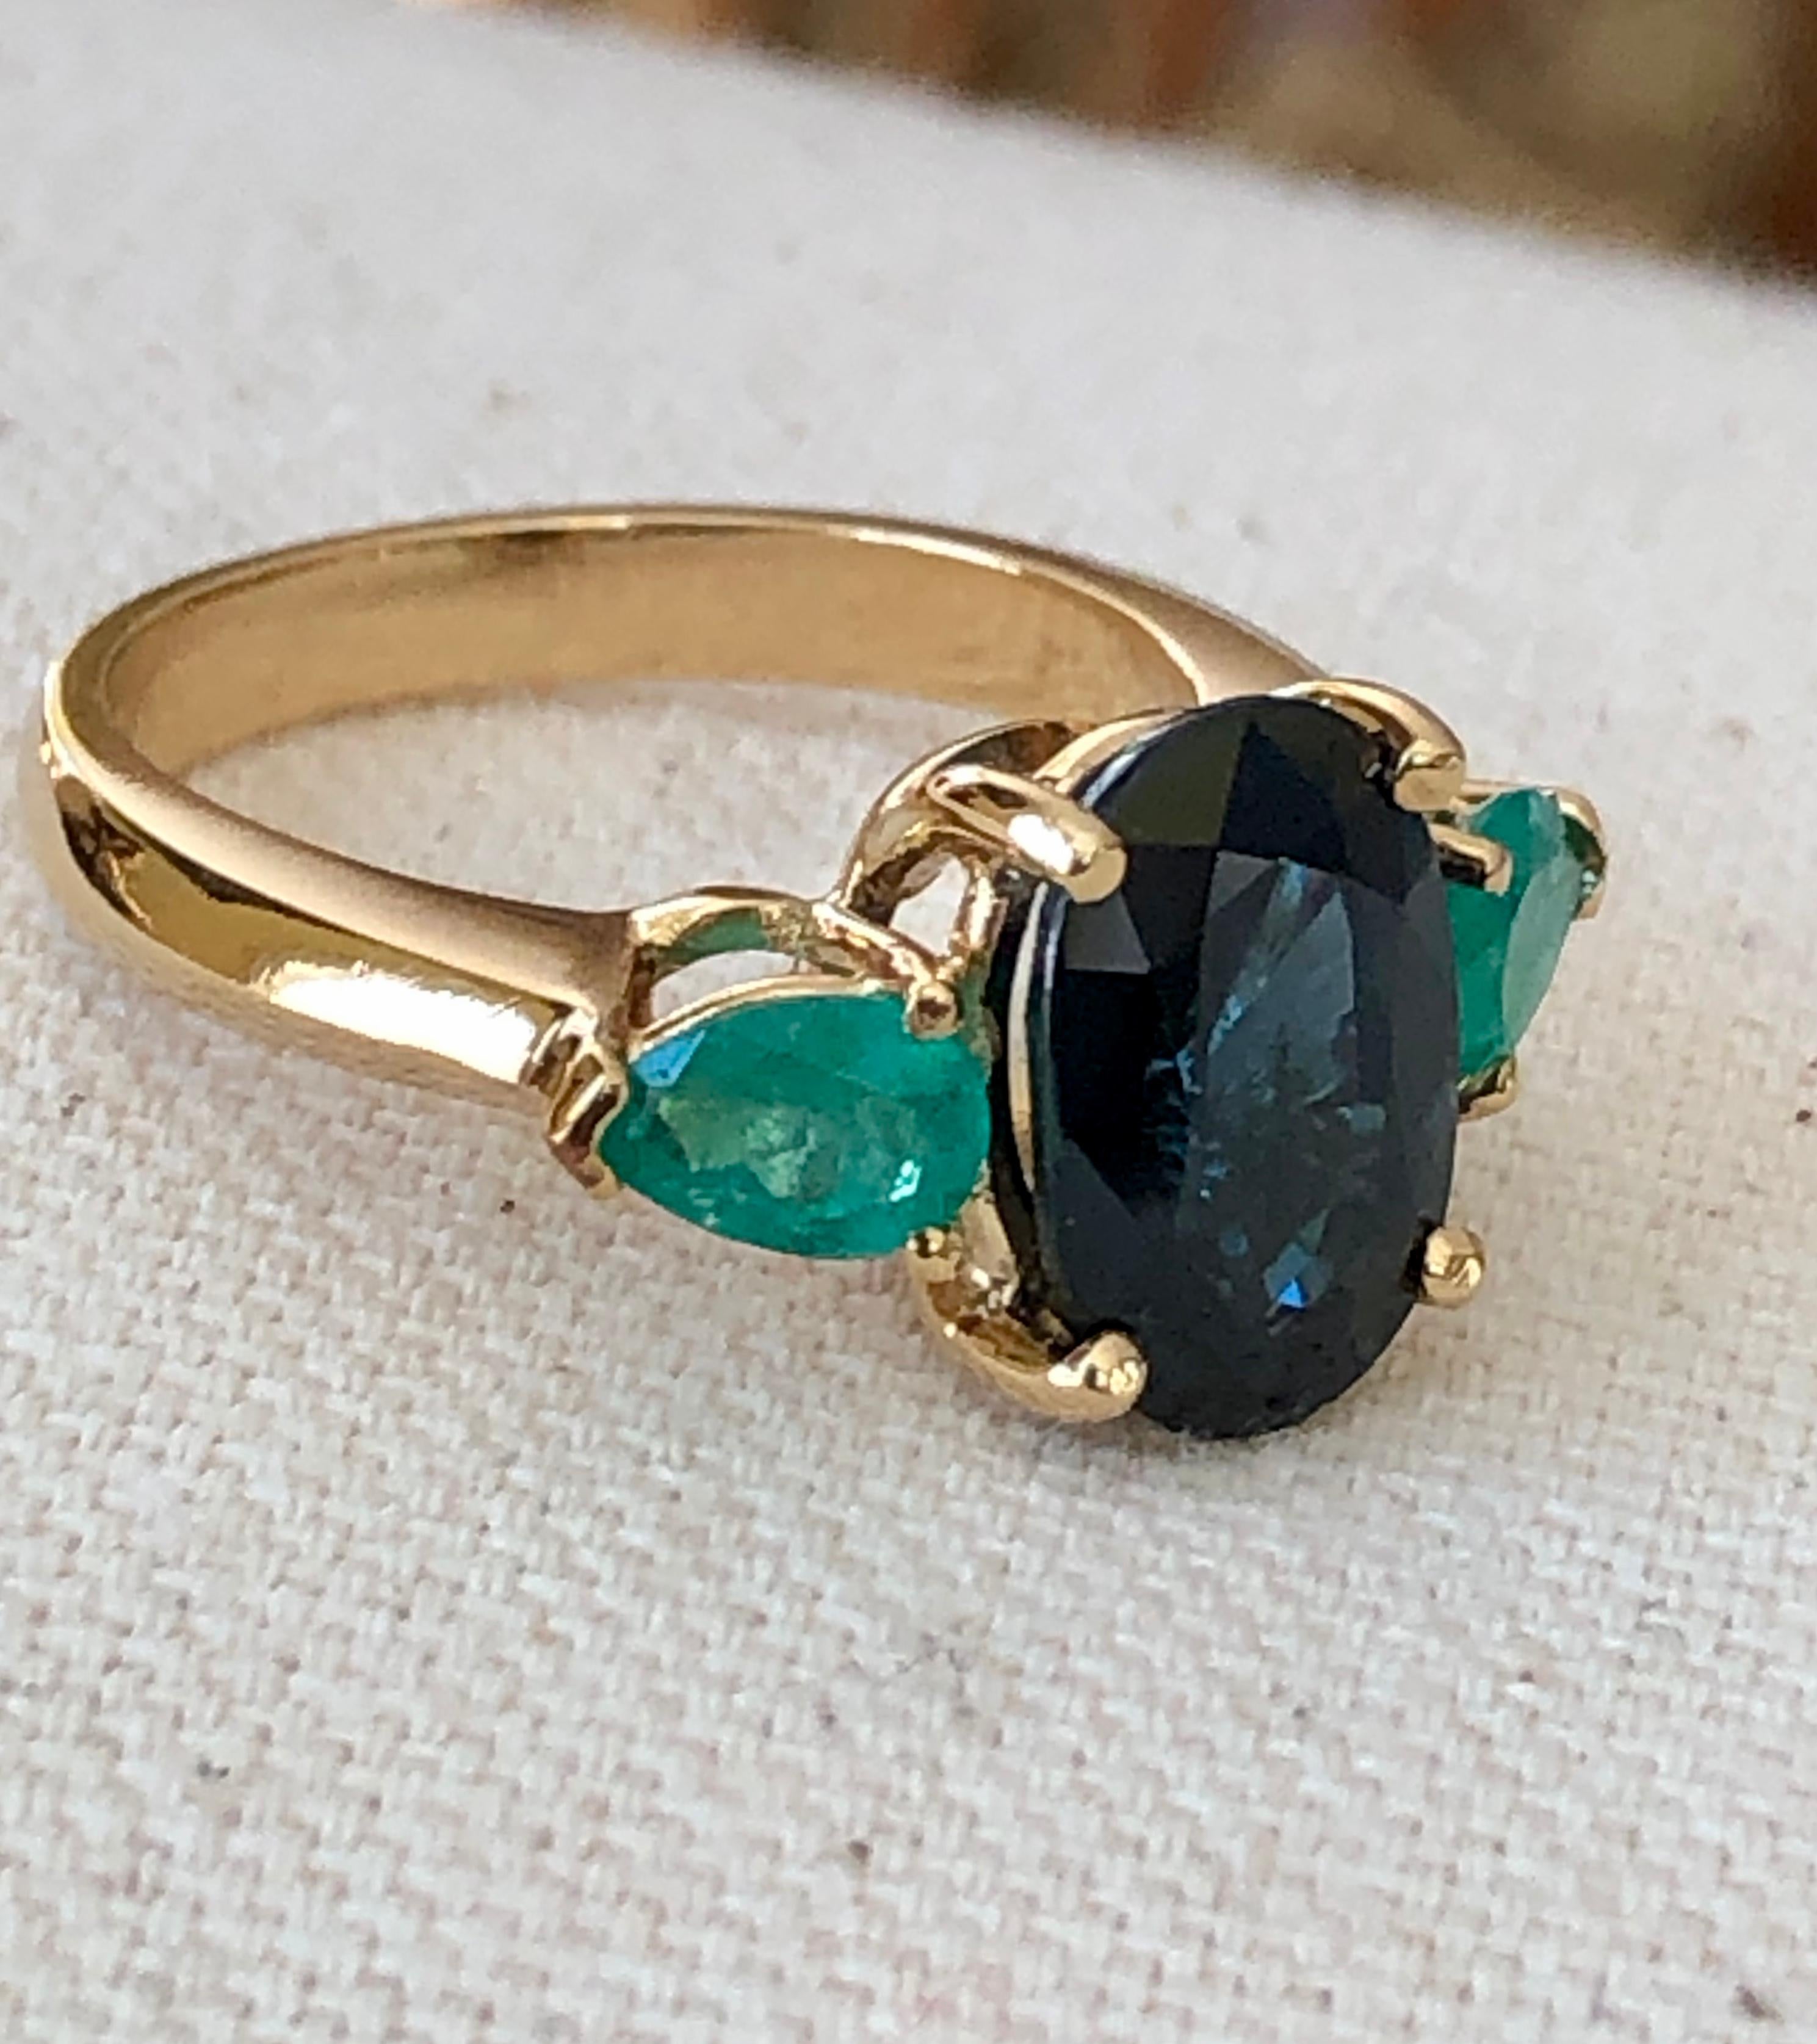 This Unique Natural Blue Sapphire and Colombian Emerald Engagement Cocktail Three Stone Ring is made of Rich Yellow Gold  18 Karat.
Featuring a stunning 4.07 Carat Natural Sapphire Cobalt Blue, Oval Cut, VS.
Sapphire Measurements: 11.50mm x 8.00